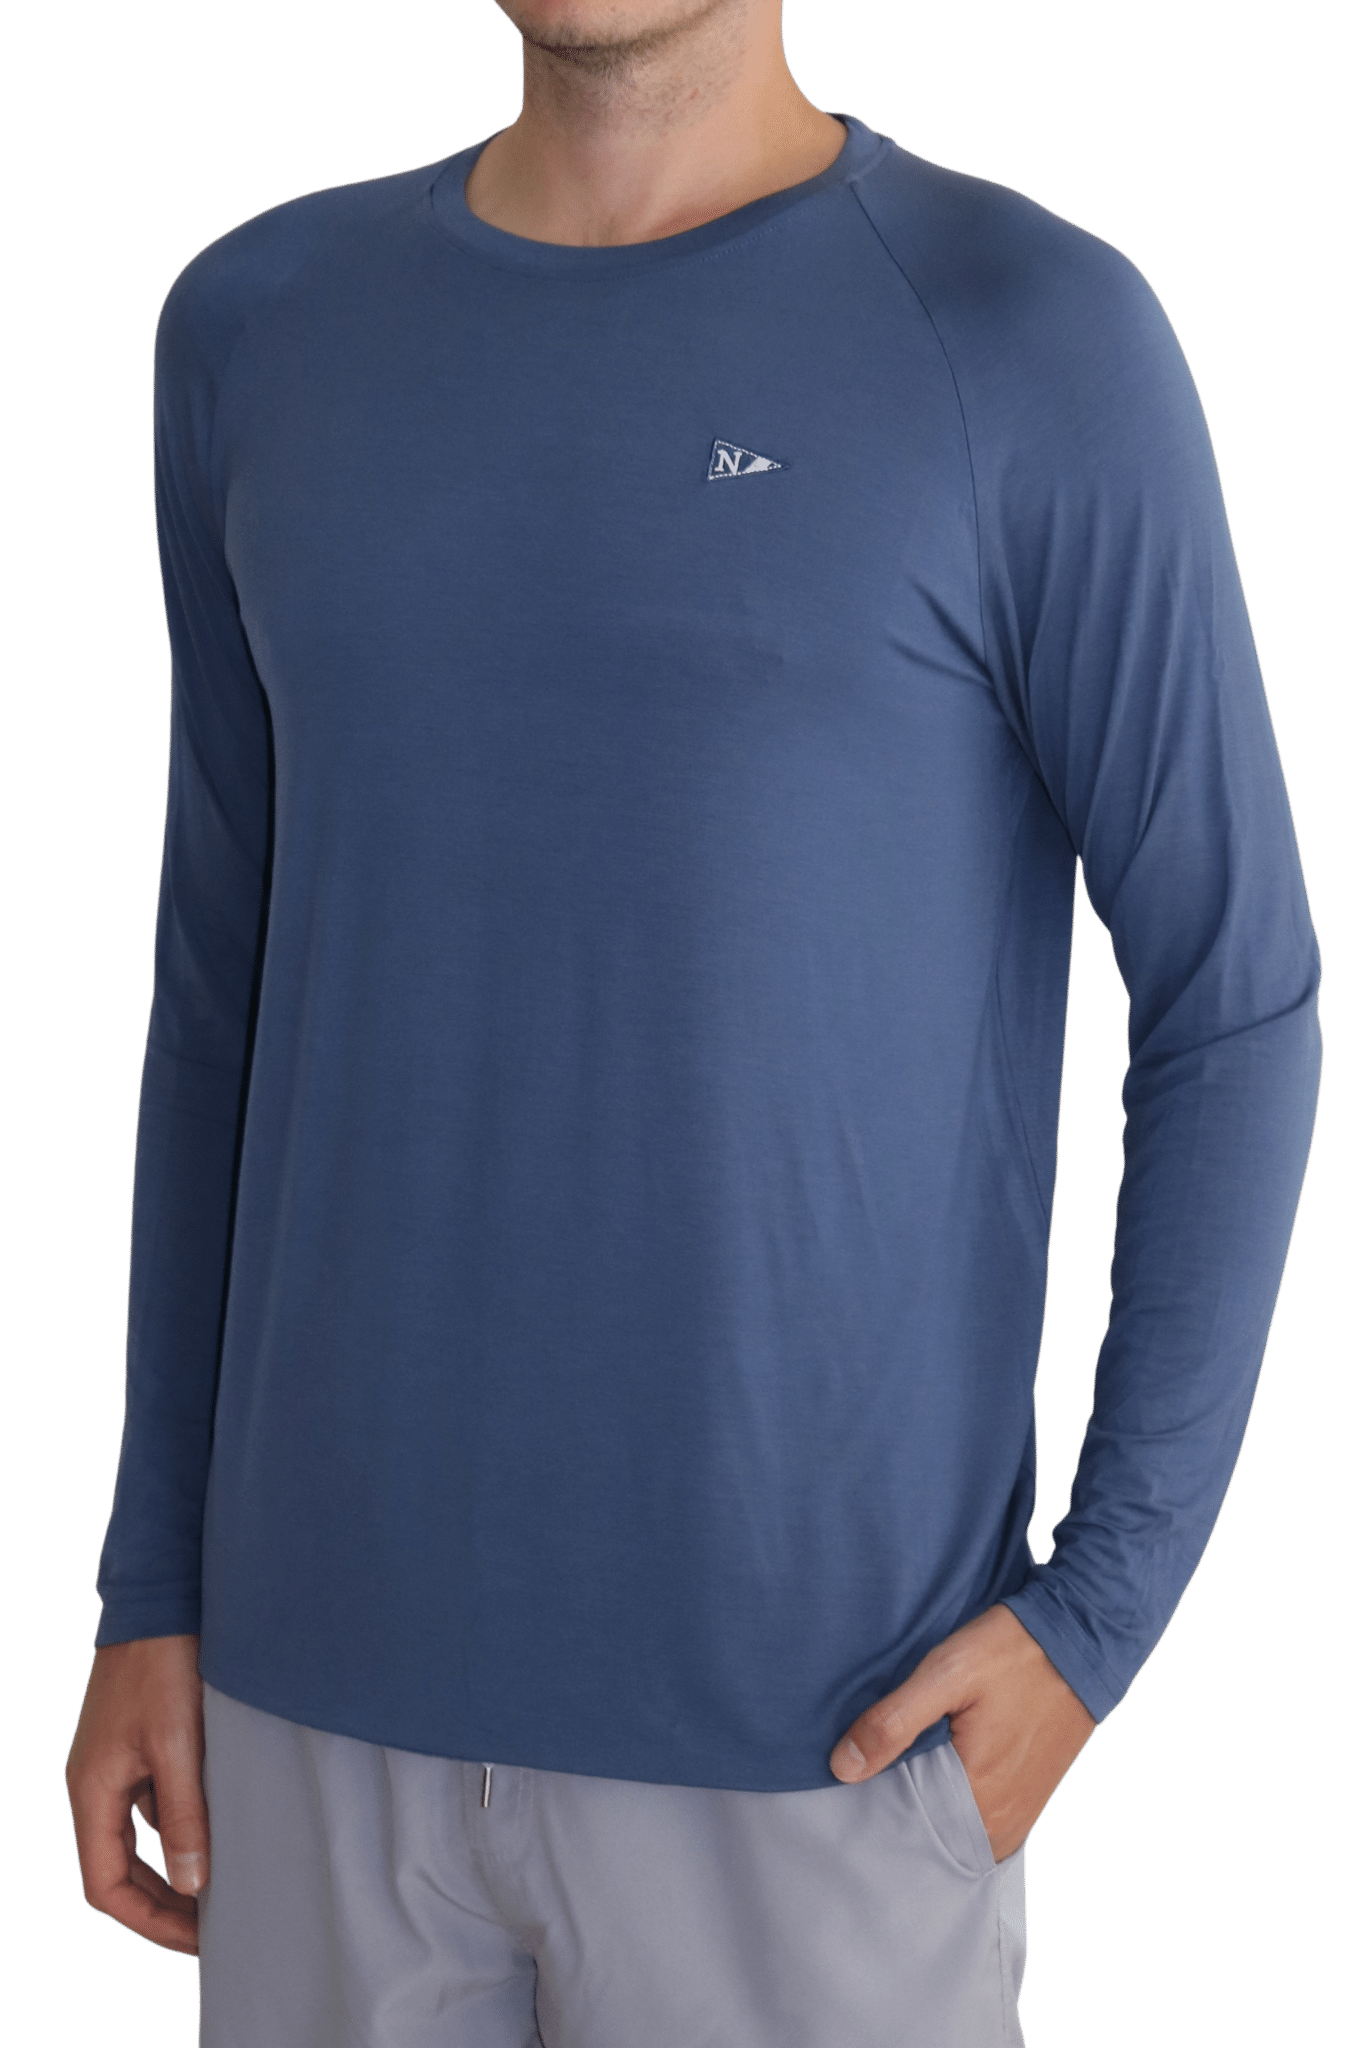 Front of the navy icon long sleeve bamboo fishing shirt.